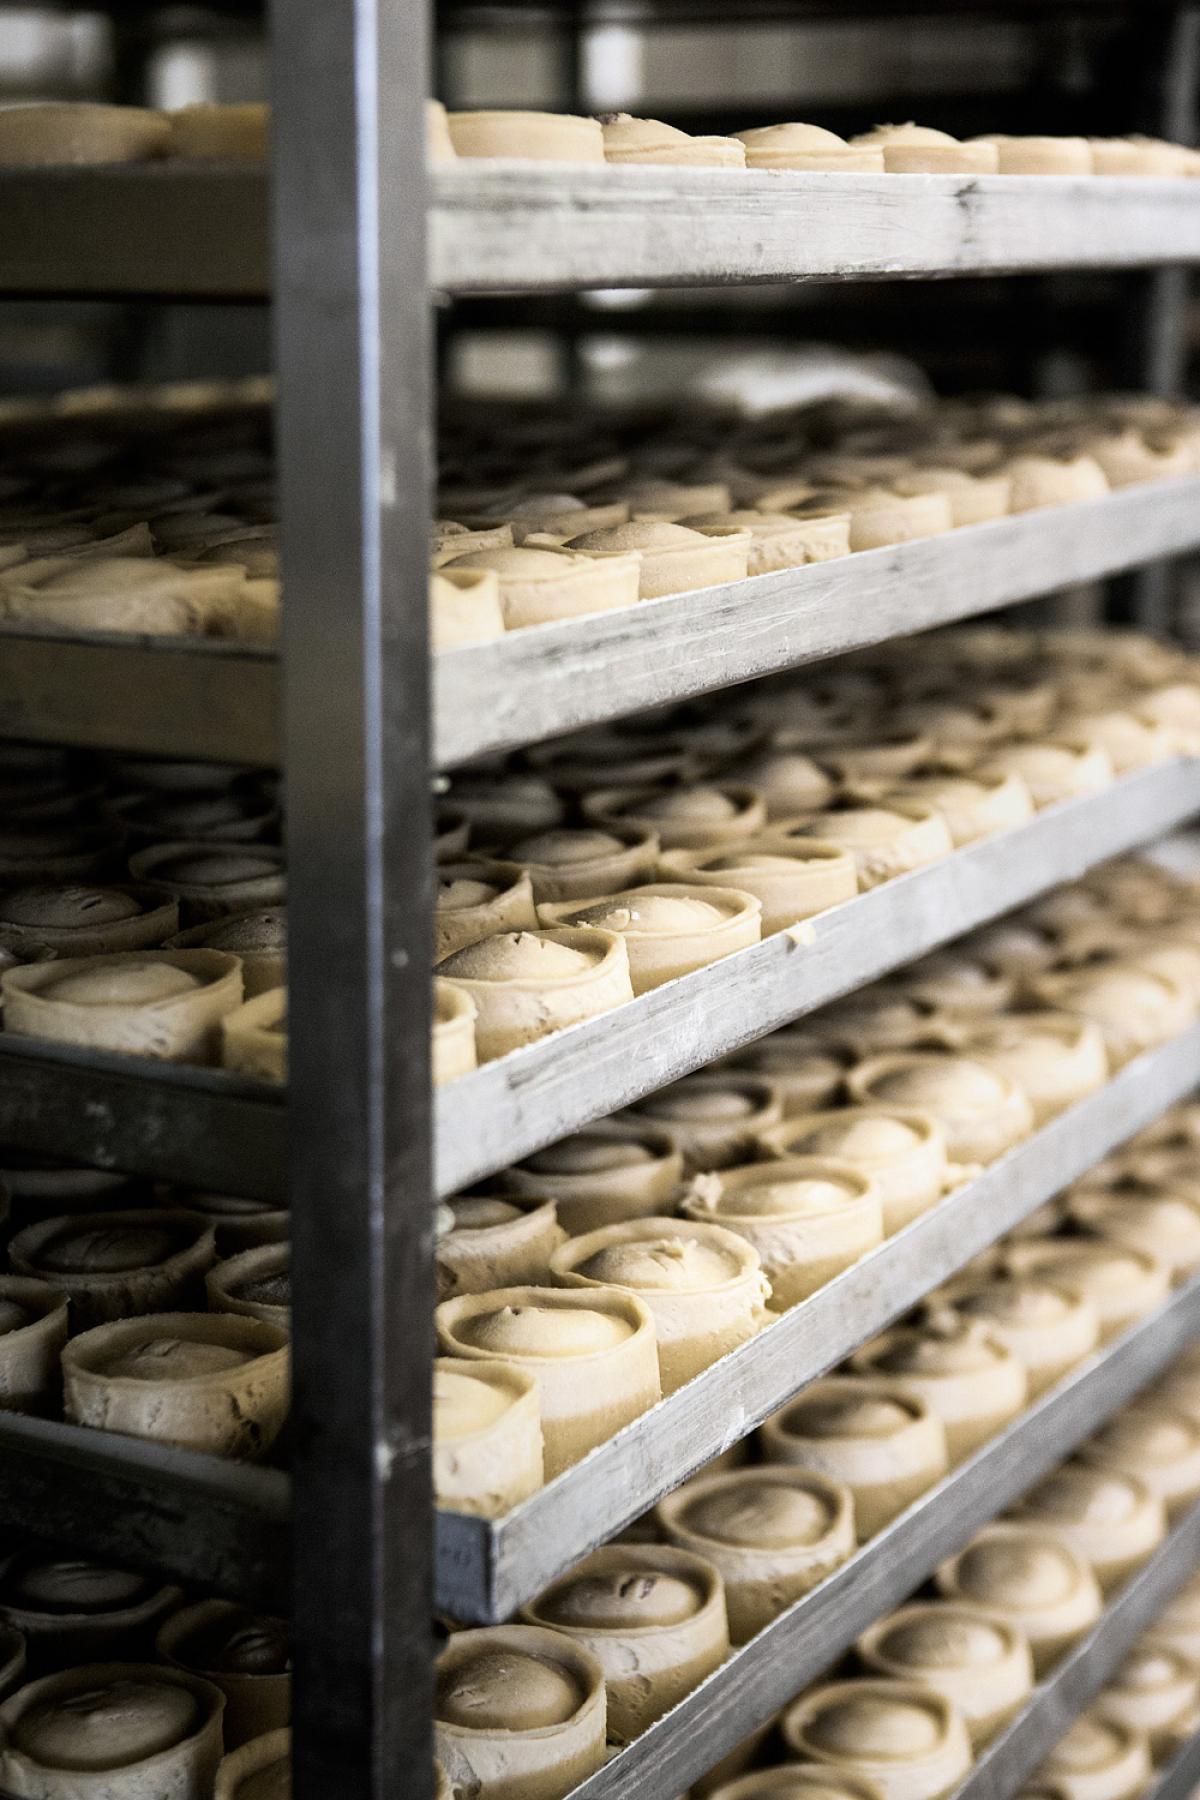 Images from The Devonshire Bakery